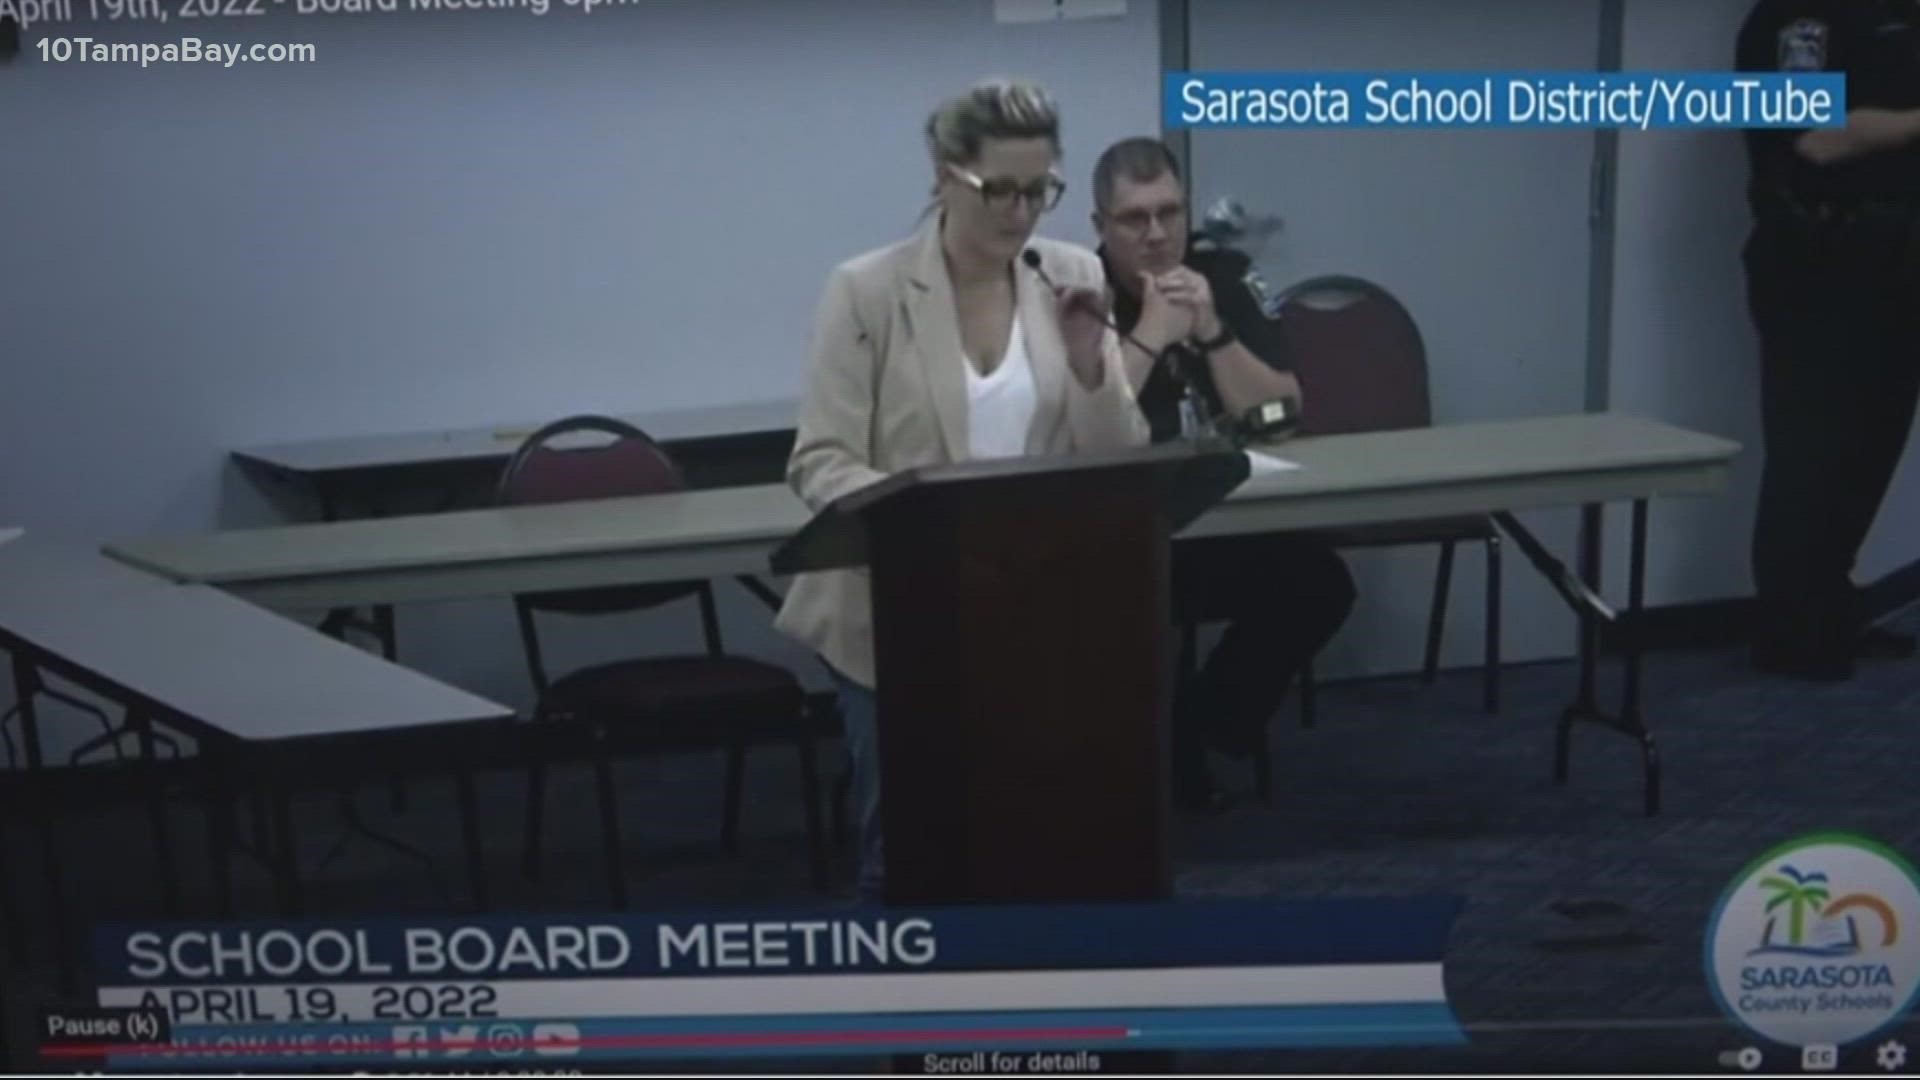 Melissa Bakondy is accusing the school board of trampling on her first amendment rights.